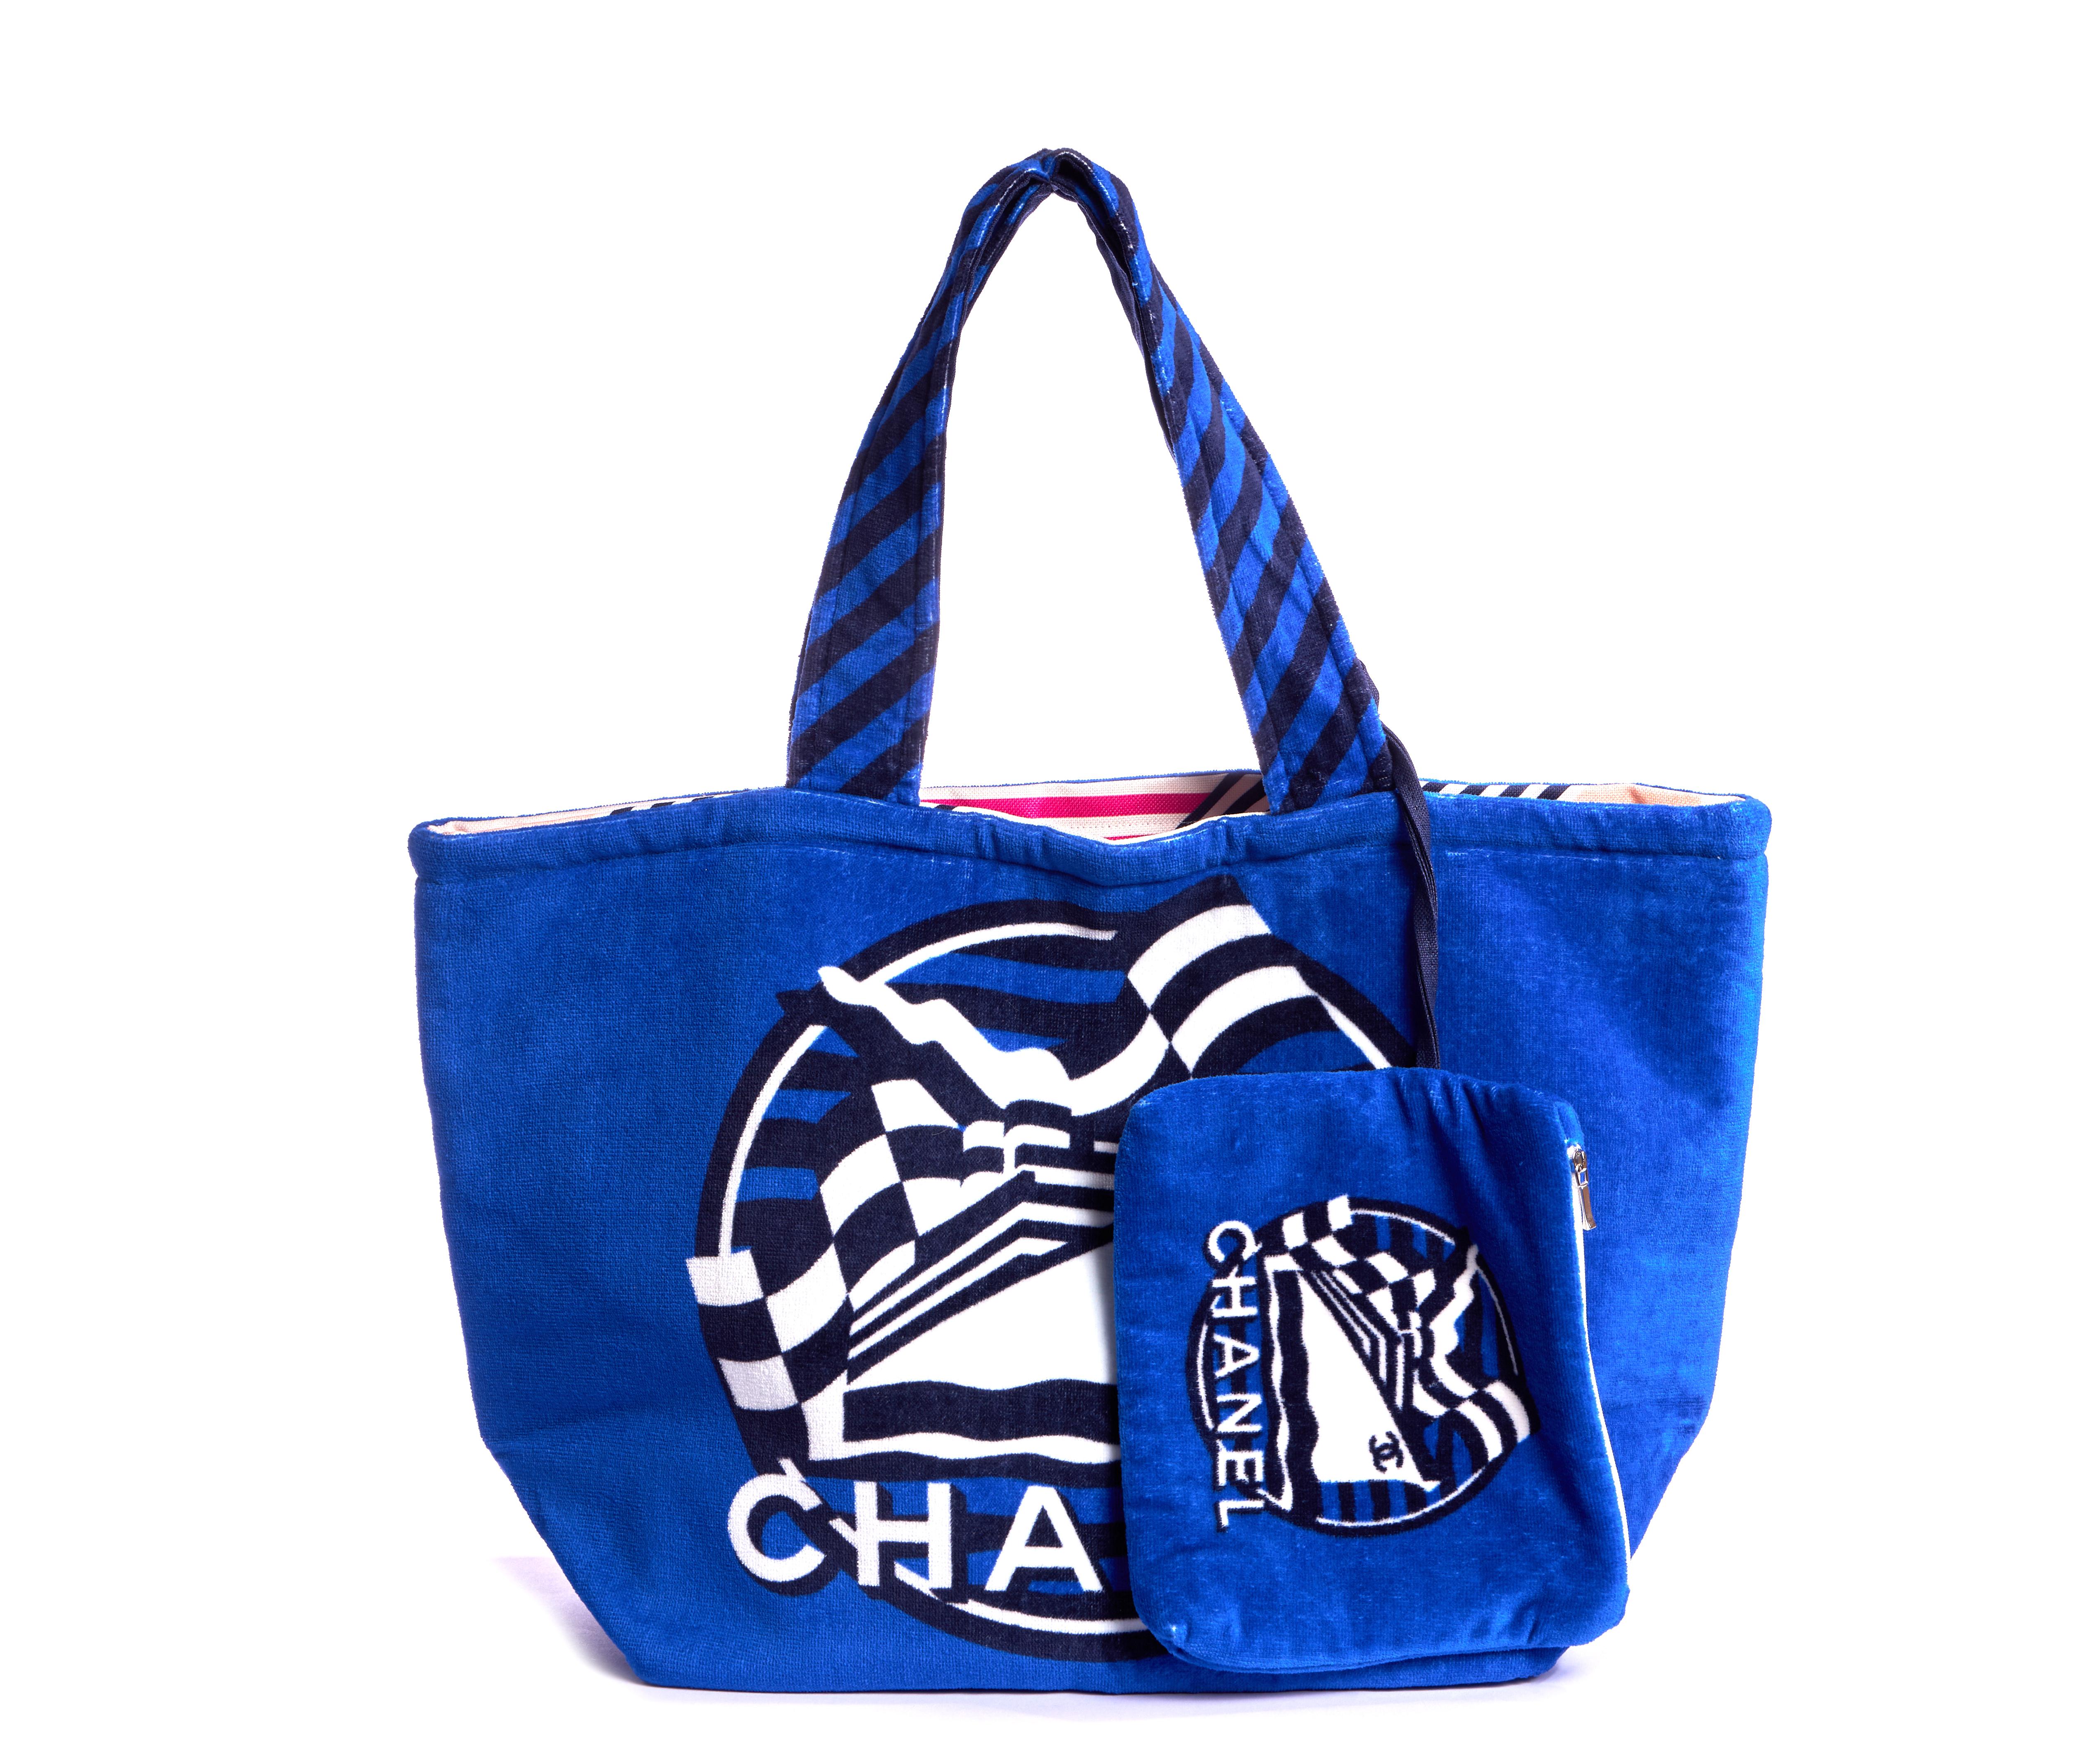 Chanel brand new beach bag in electric blue terry cloth with colorful lined interior. Detachable interior pouch can be worn separately. Cruise 2019 collection. Top opening 21.5, handle drop 10